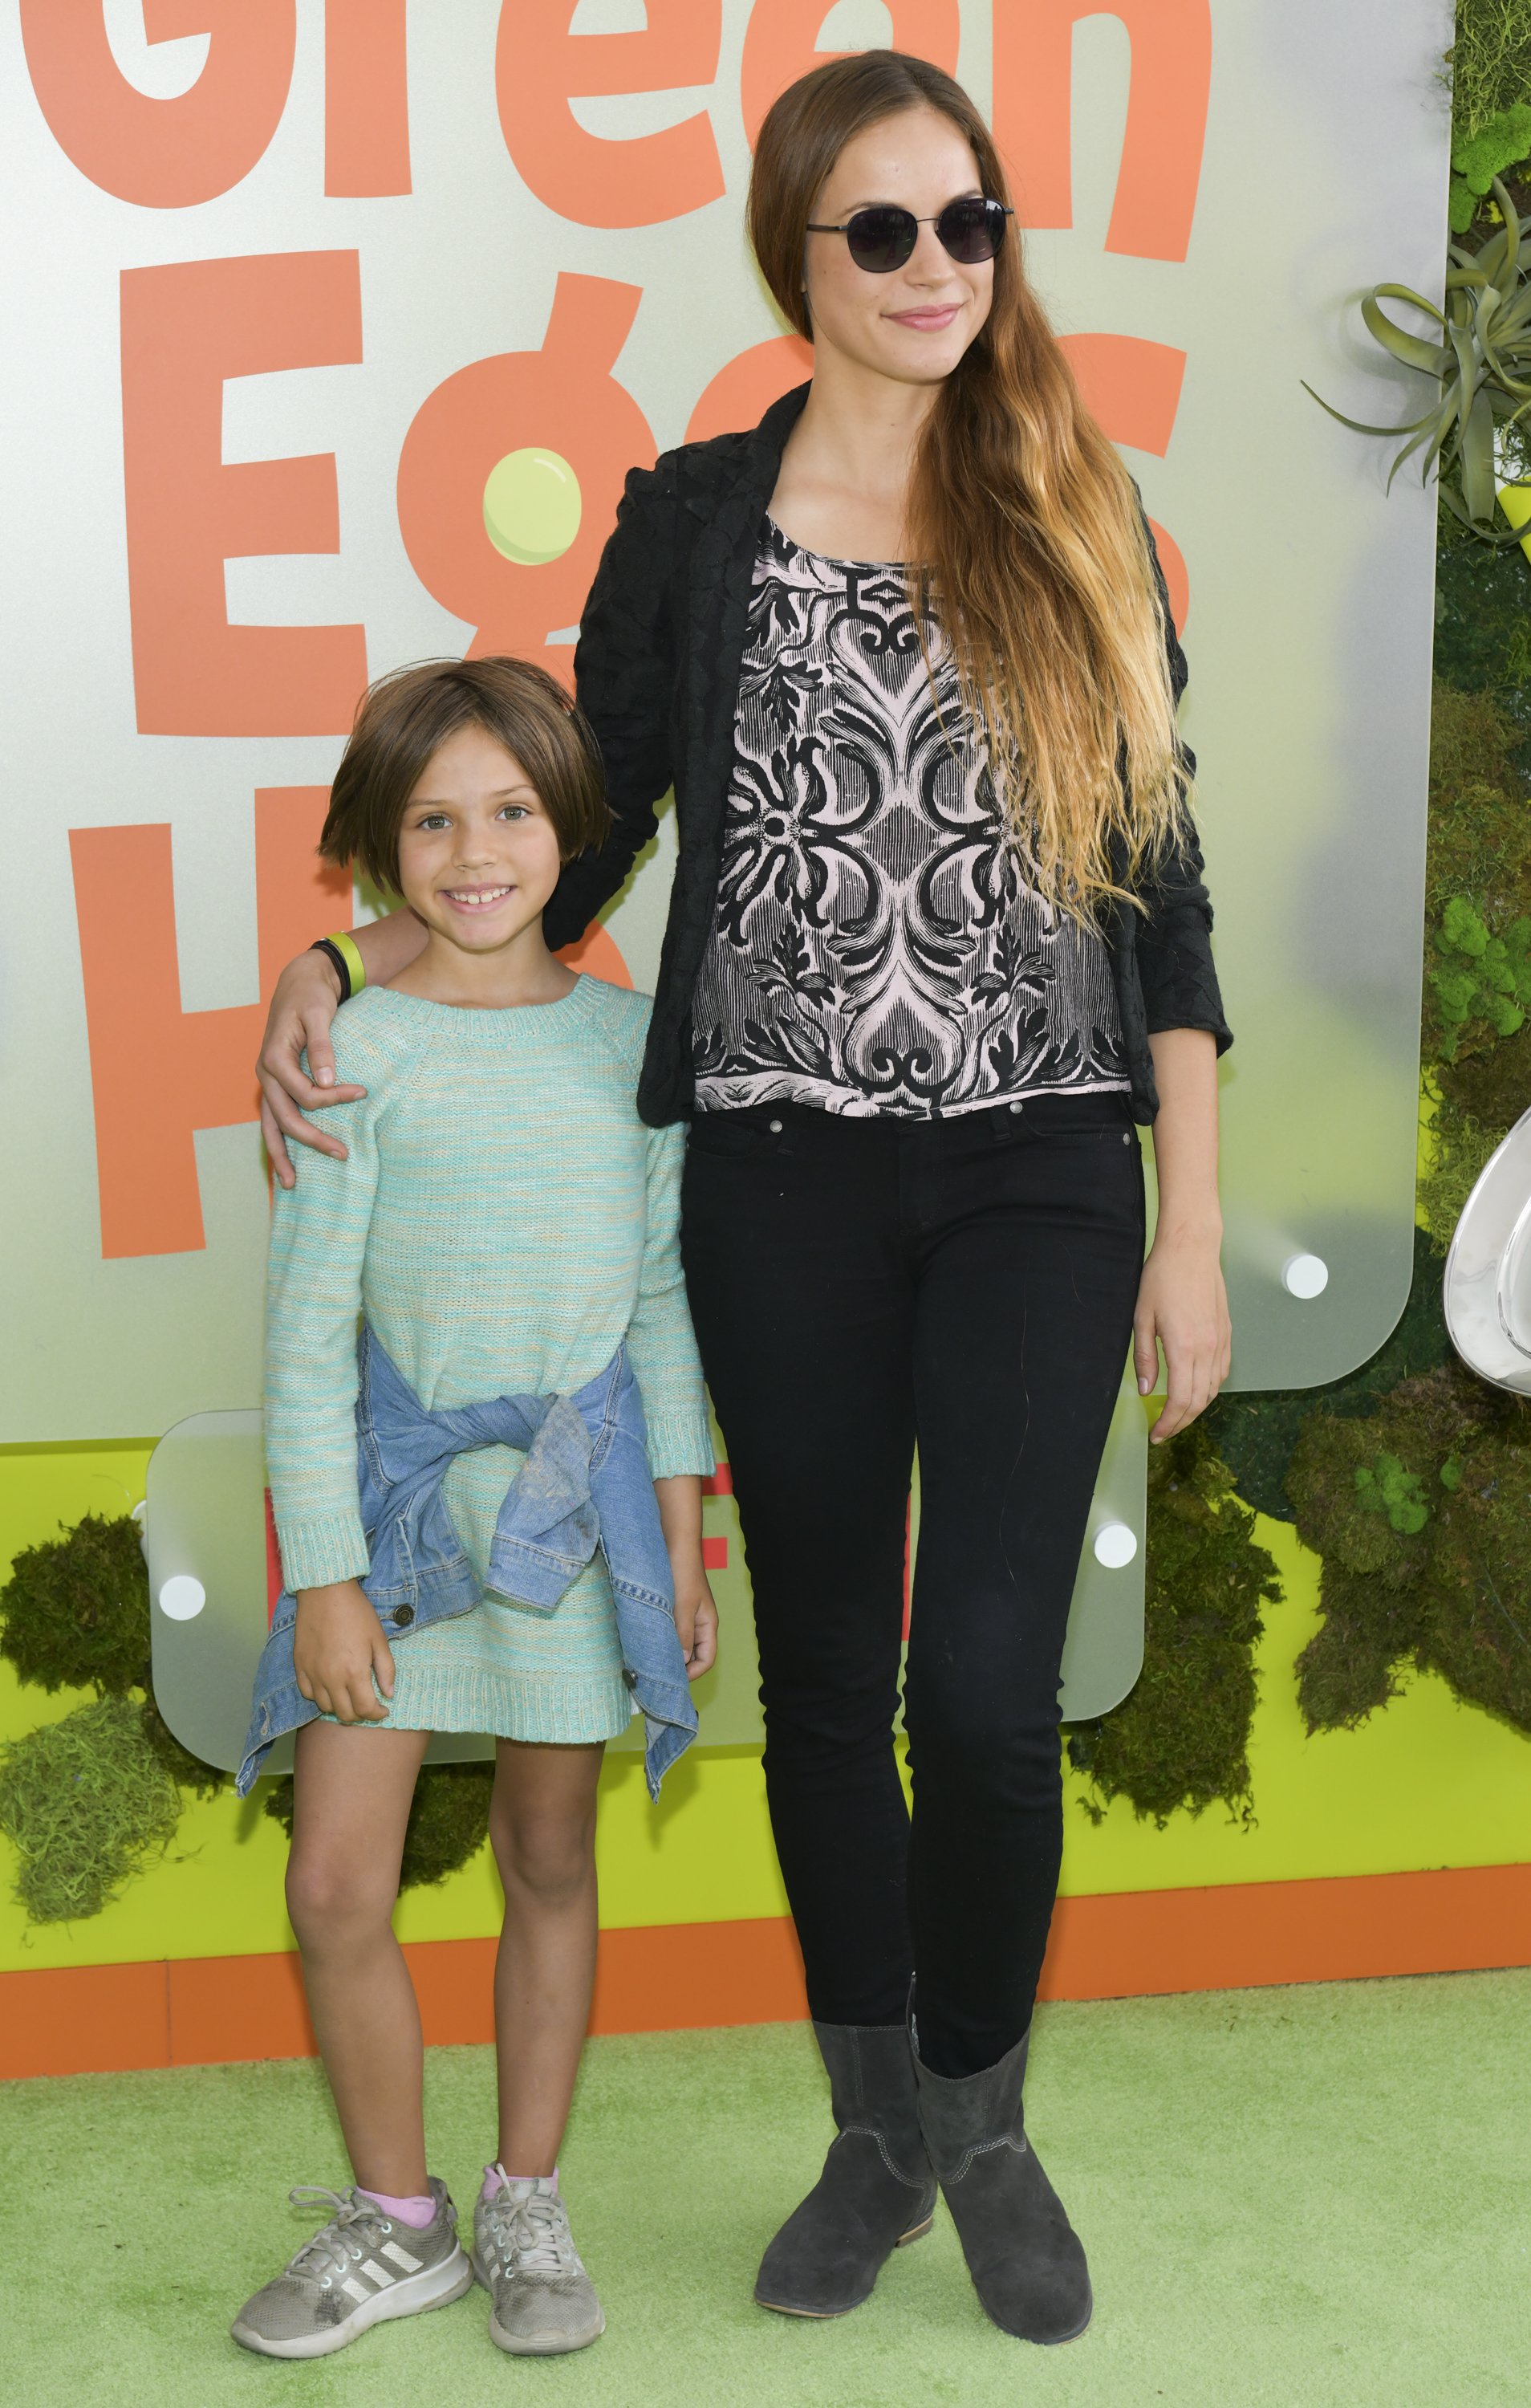 Alexis and Kai Knapp attend the Premiere of Netflix's "Green Eggs and Ham" at Hollywood American Legion on November 3, 2019 in Los Angeles, California. | Source: Getty Images